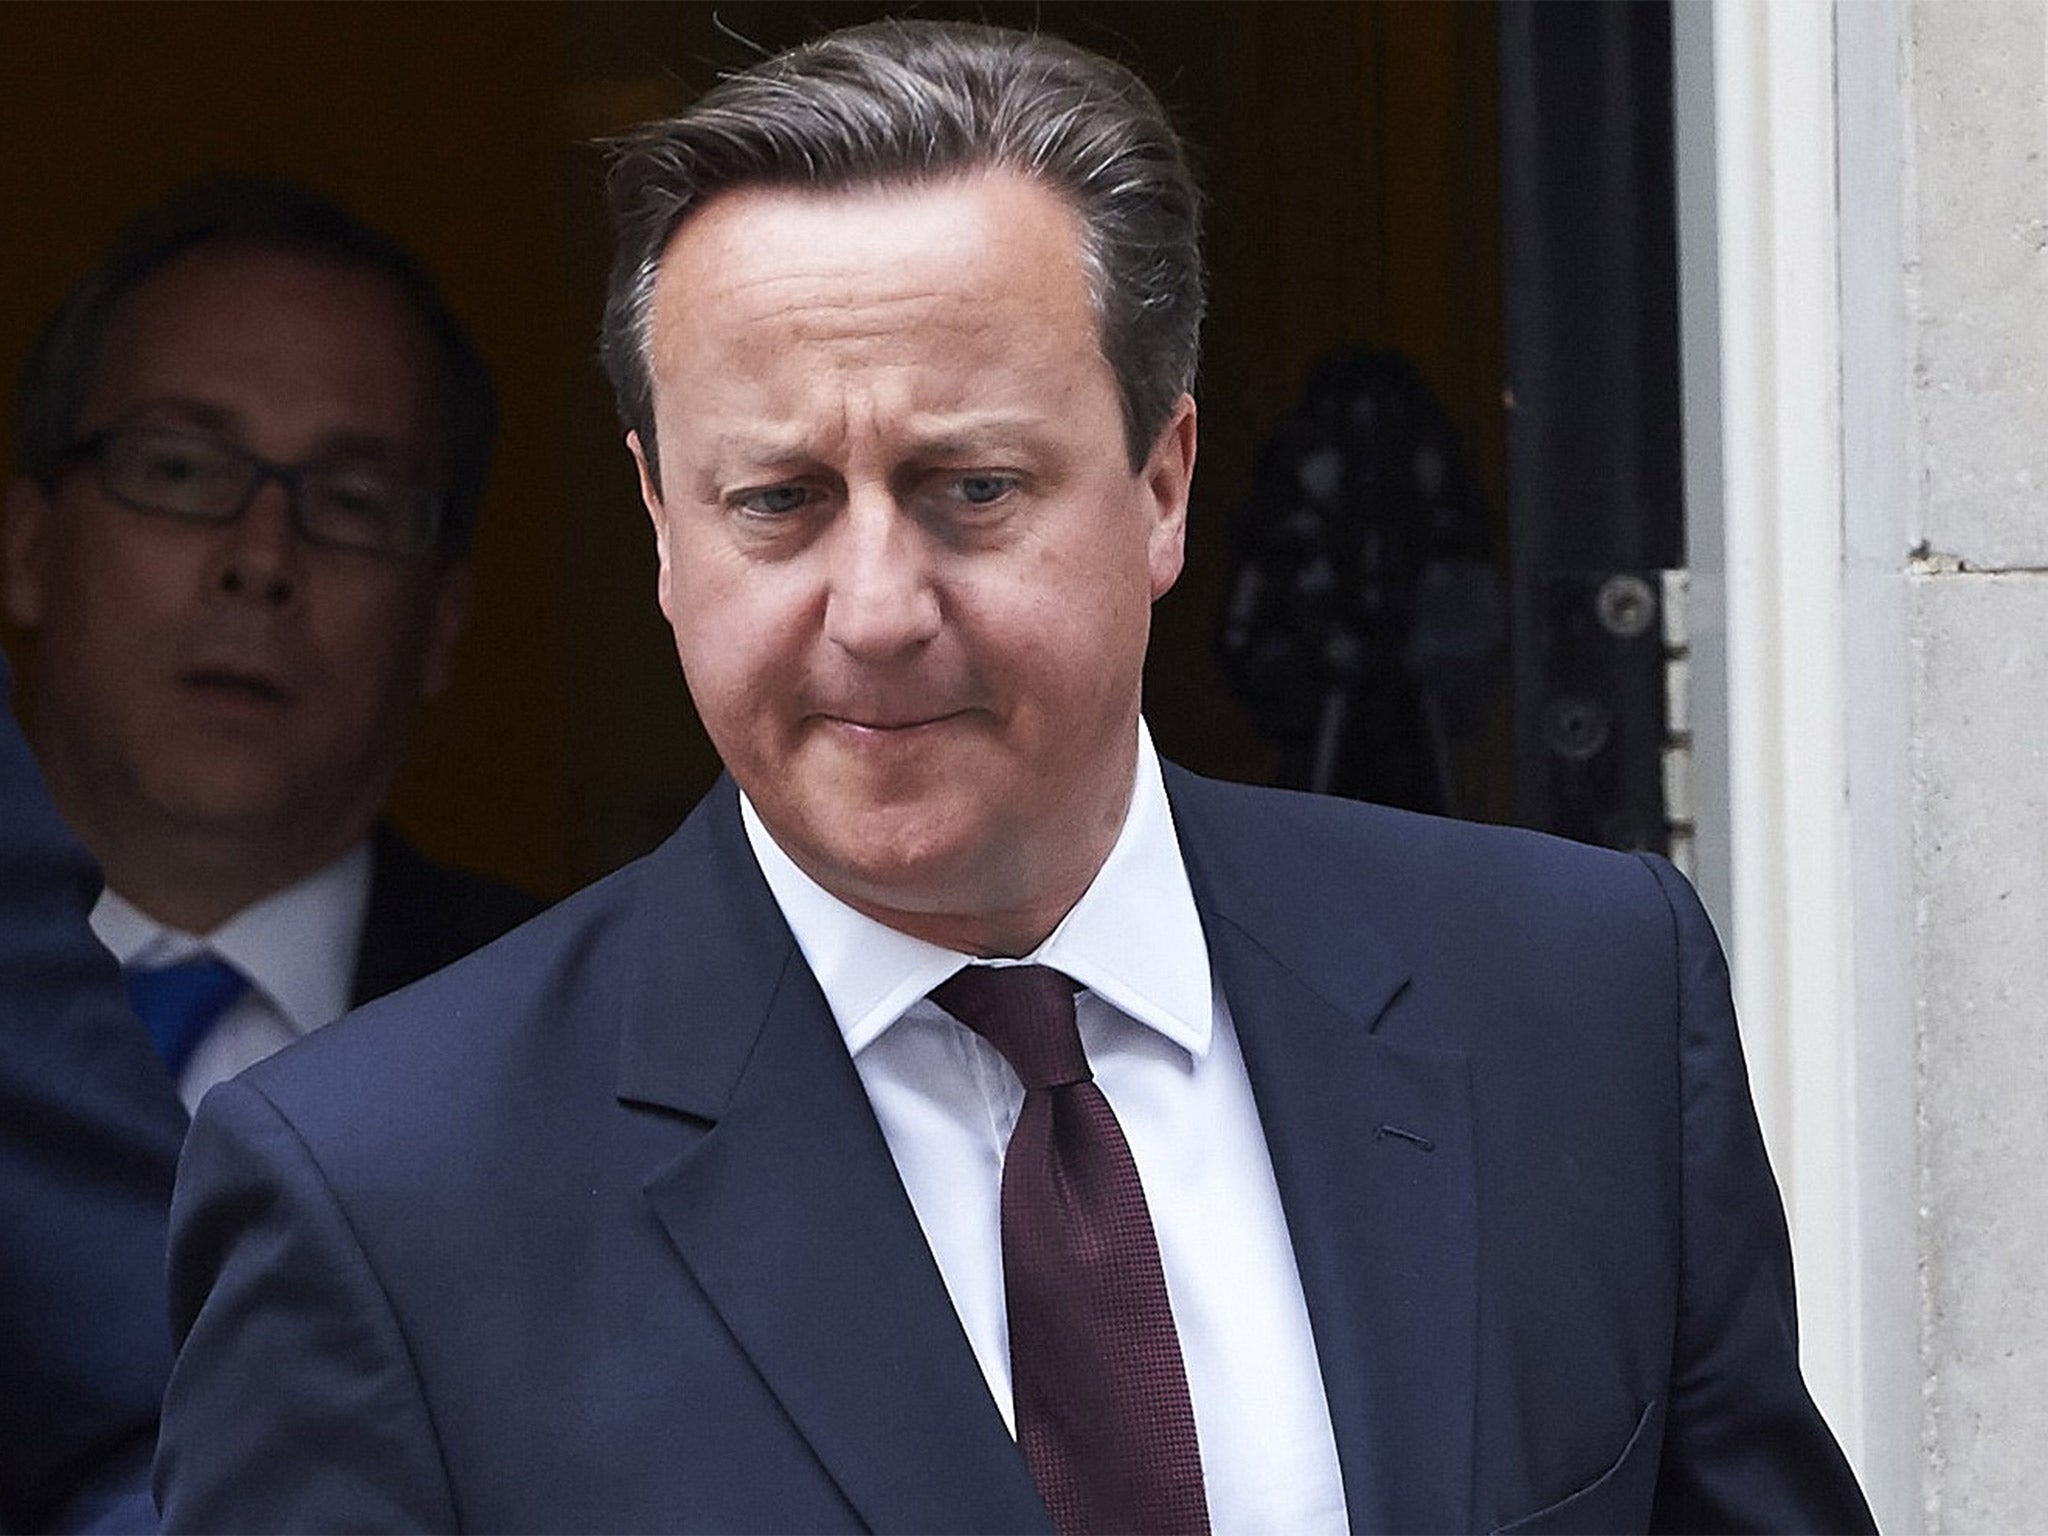 Downing Street said David Cameron was 'gravely concerned' about the situation in Northern Ireland